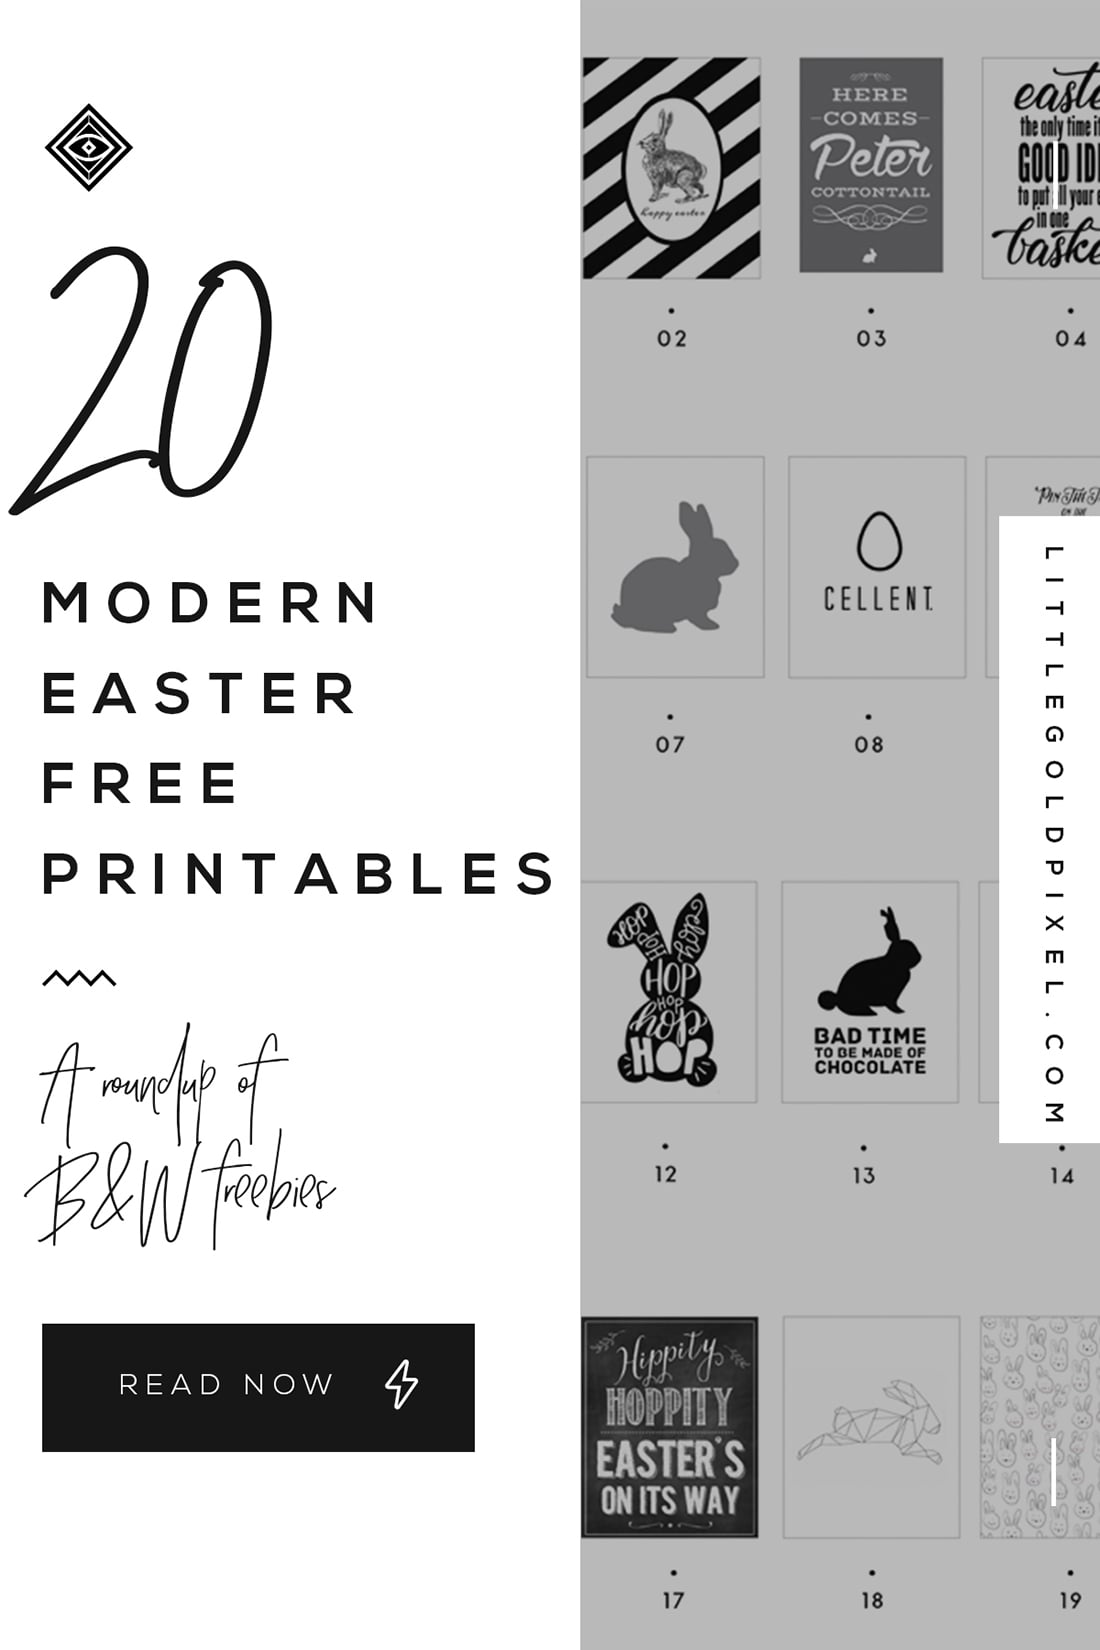 Modern Easter Free Printables • A roundup • Little Gold Pixel